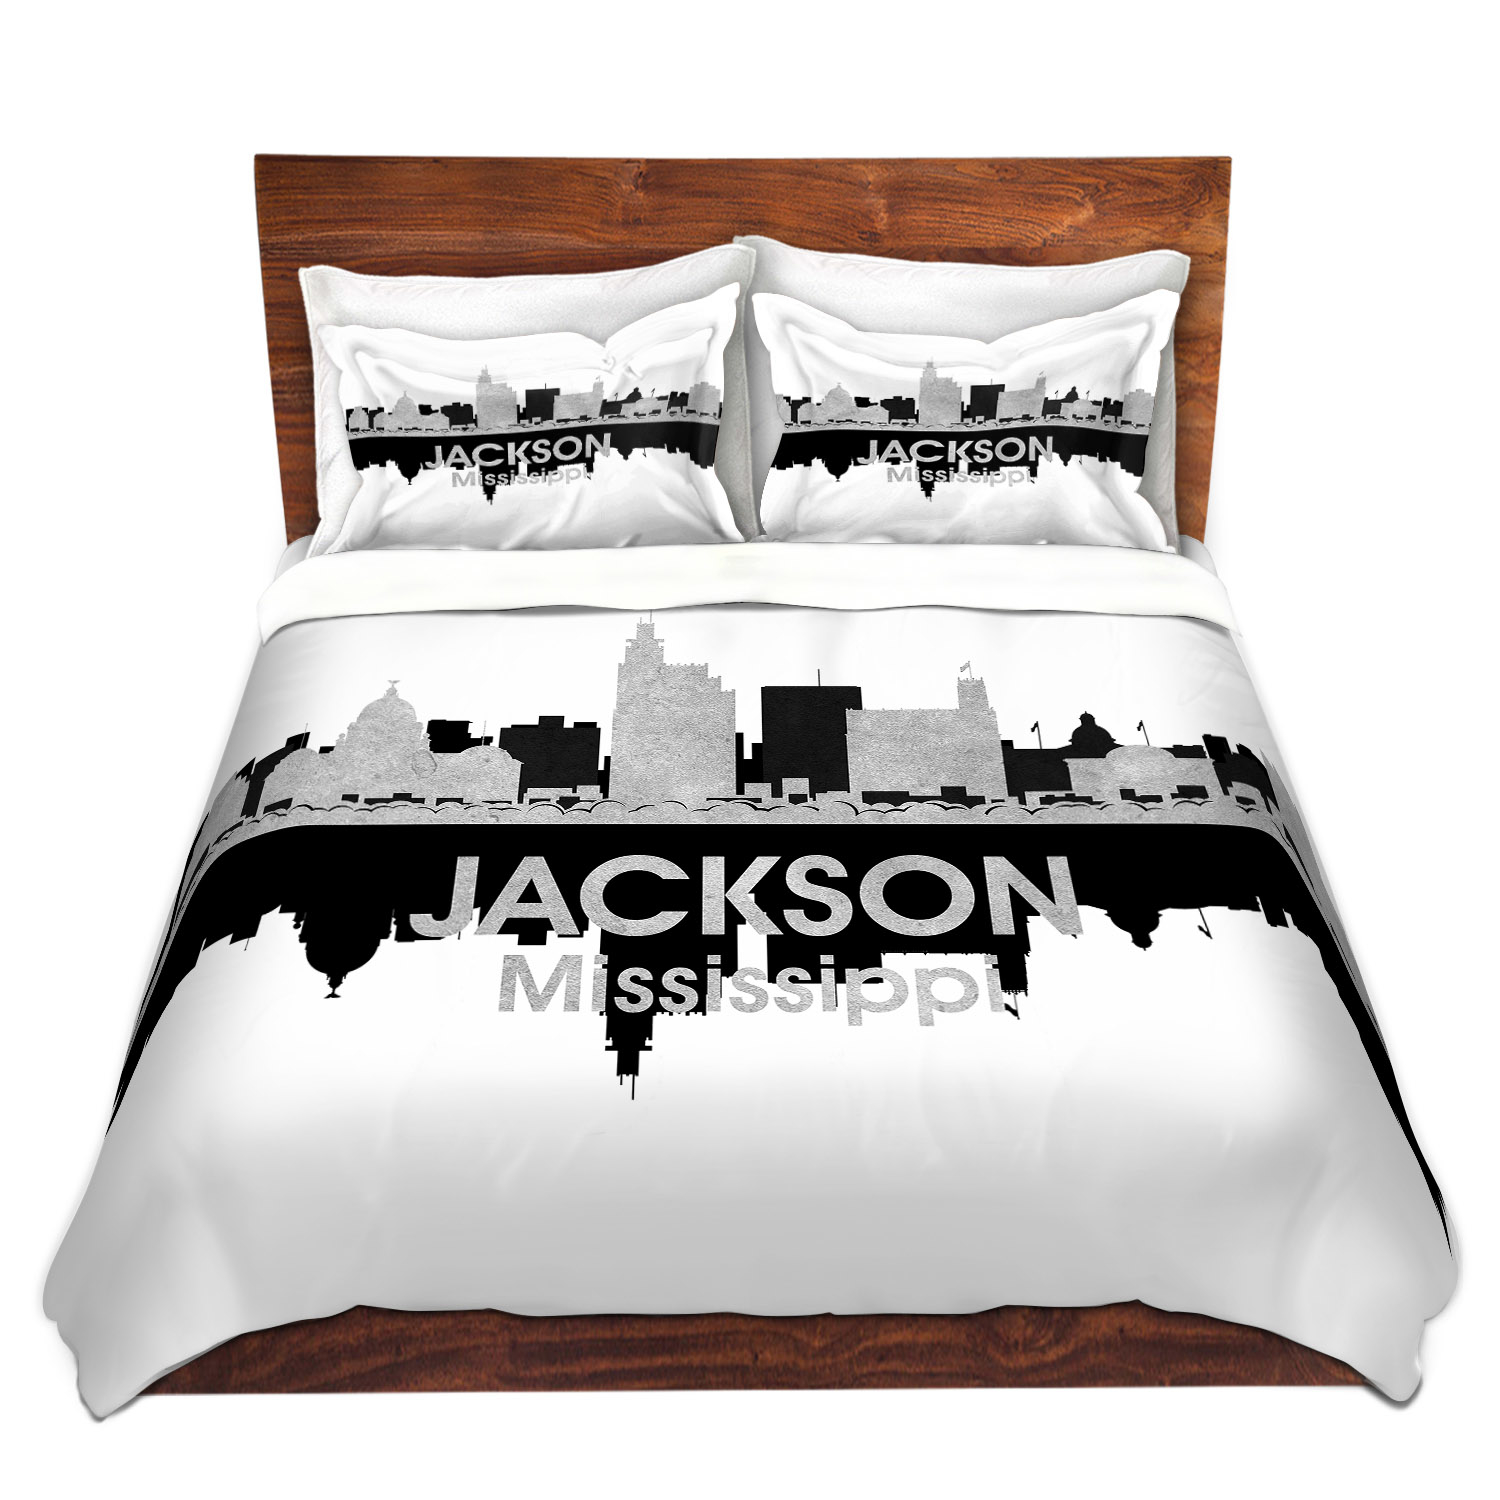 Dianoche Microfiber Duvet Covers By Angelina Vick - City Iv Jackson Mississippi